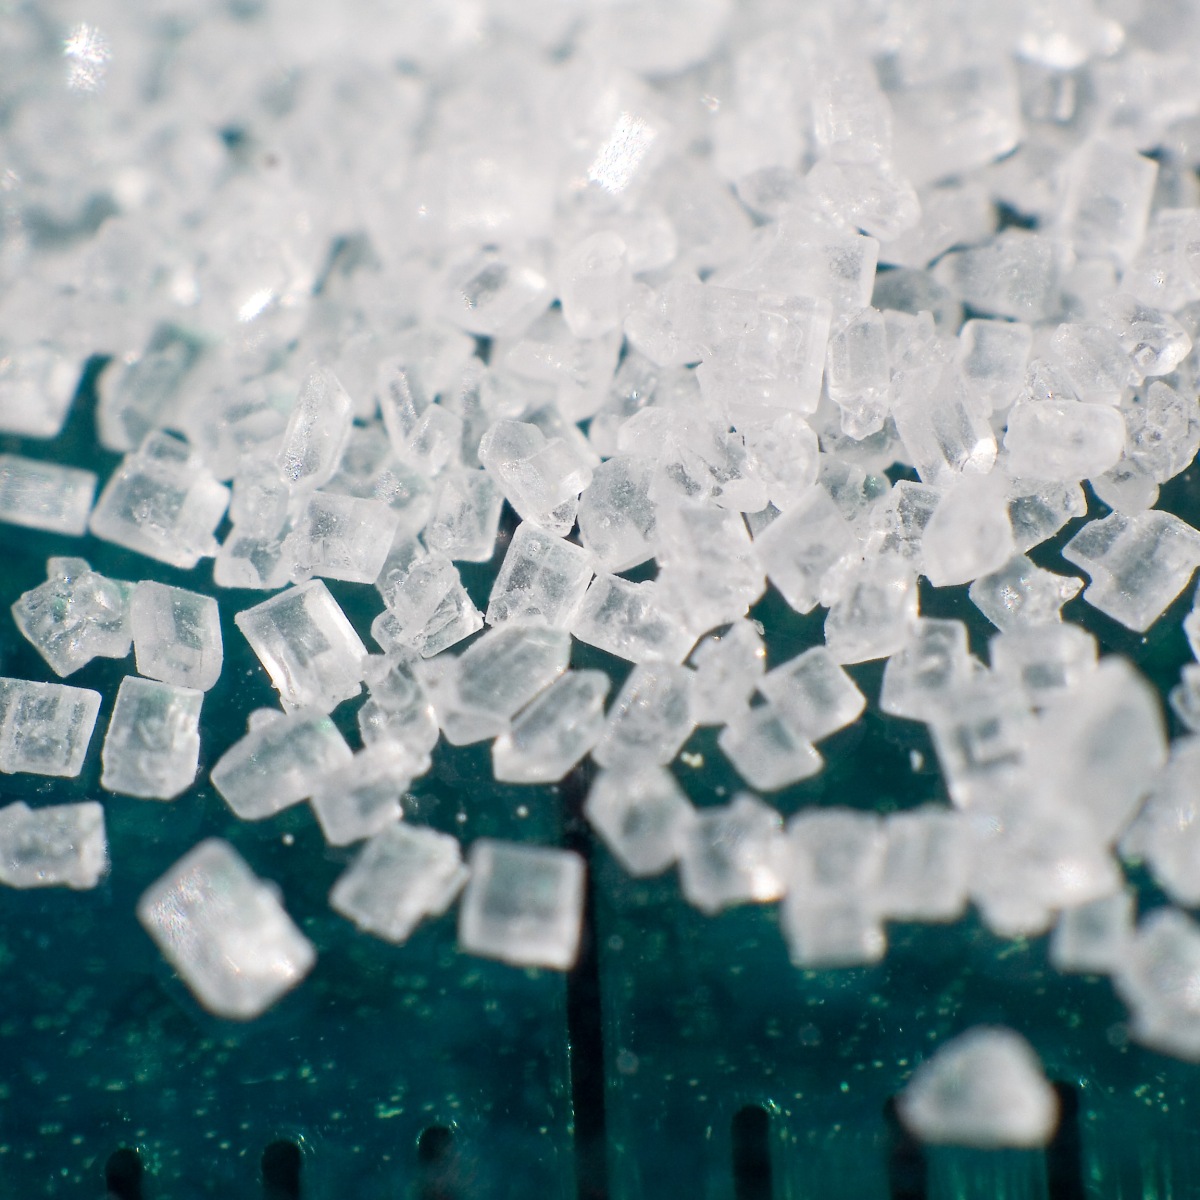 Sugar Industry Paid Harvard Scientists to Manipulate Research